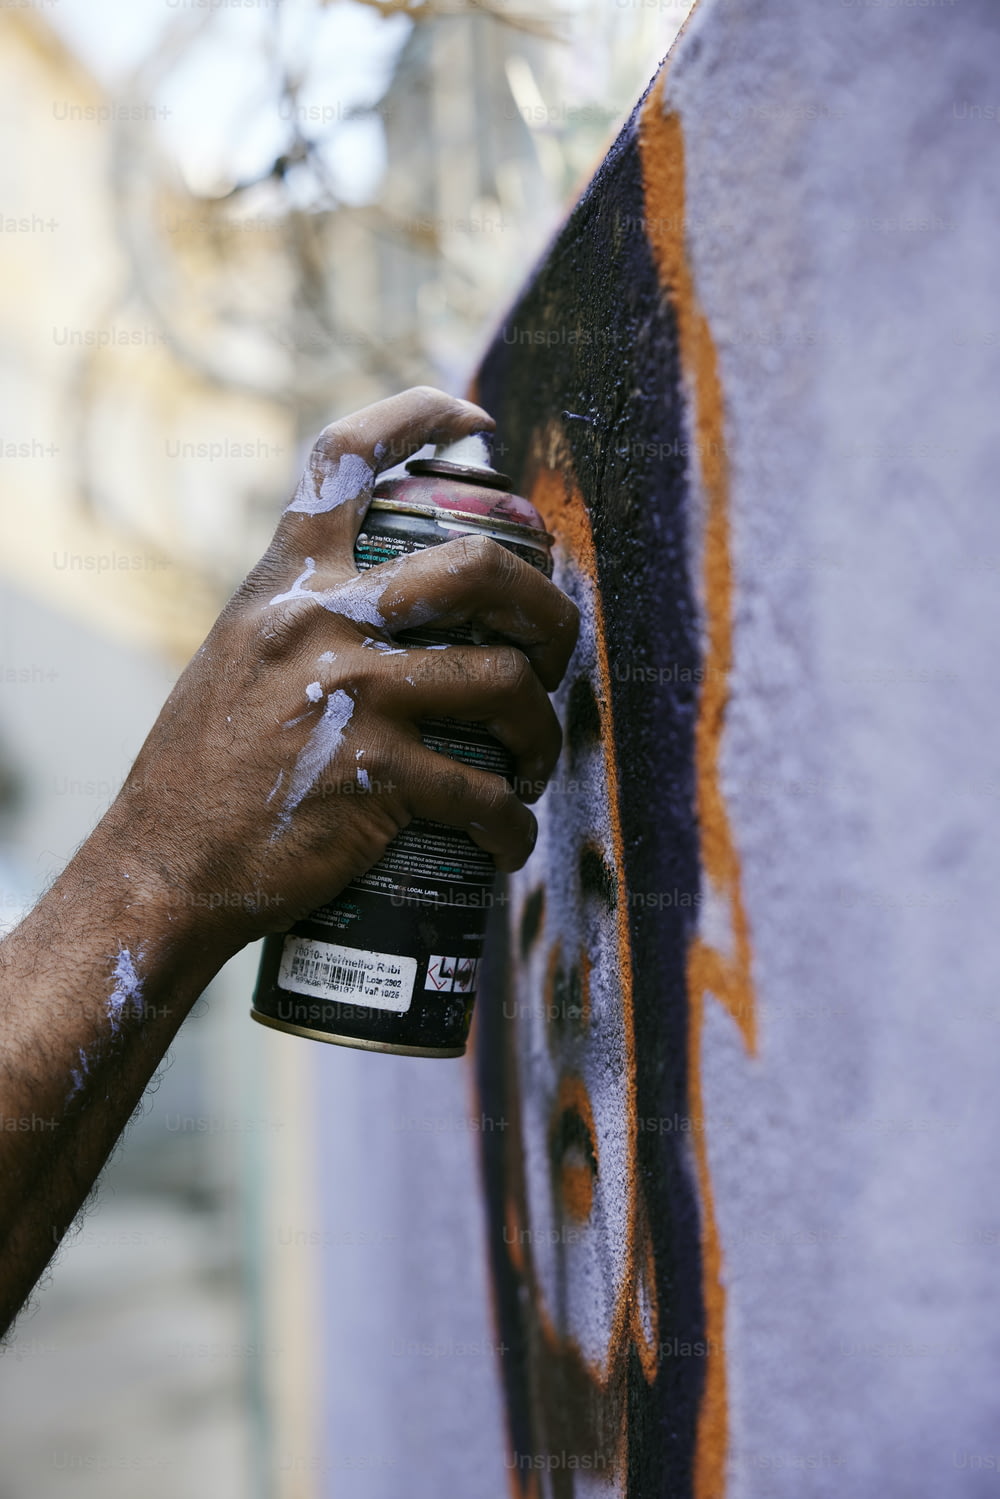 a person spray painting a wall with orange and black paint